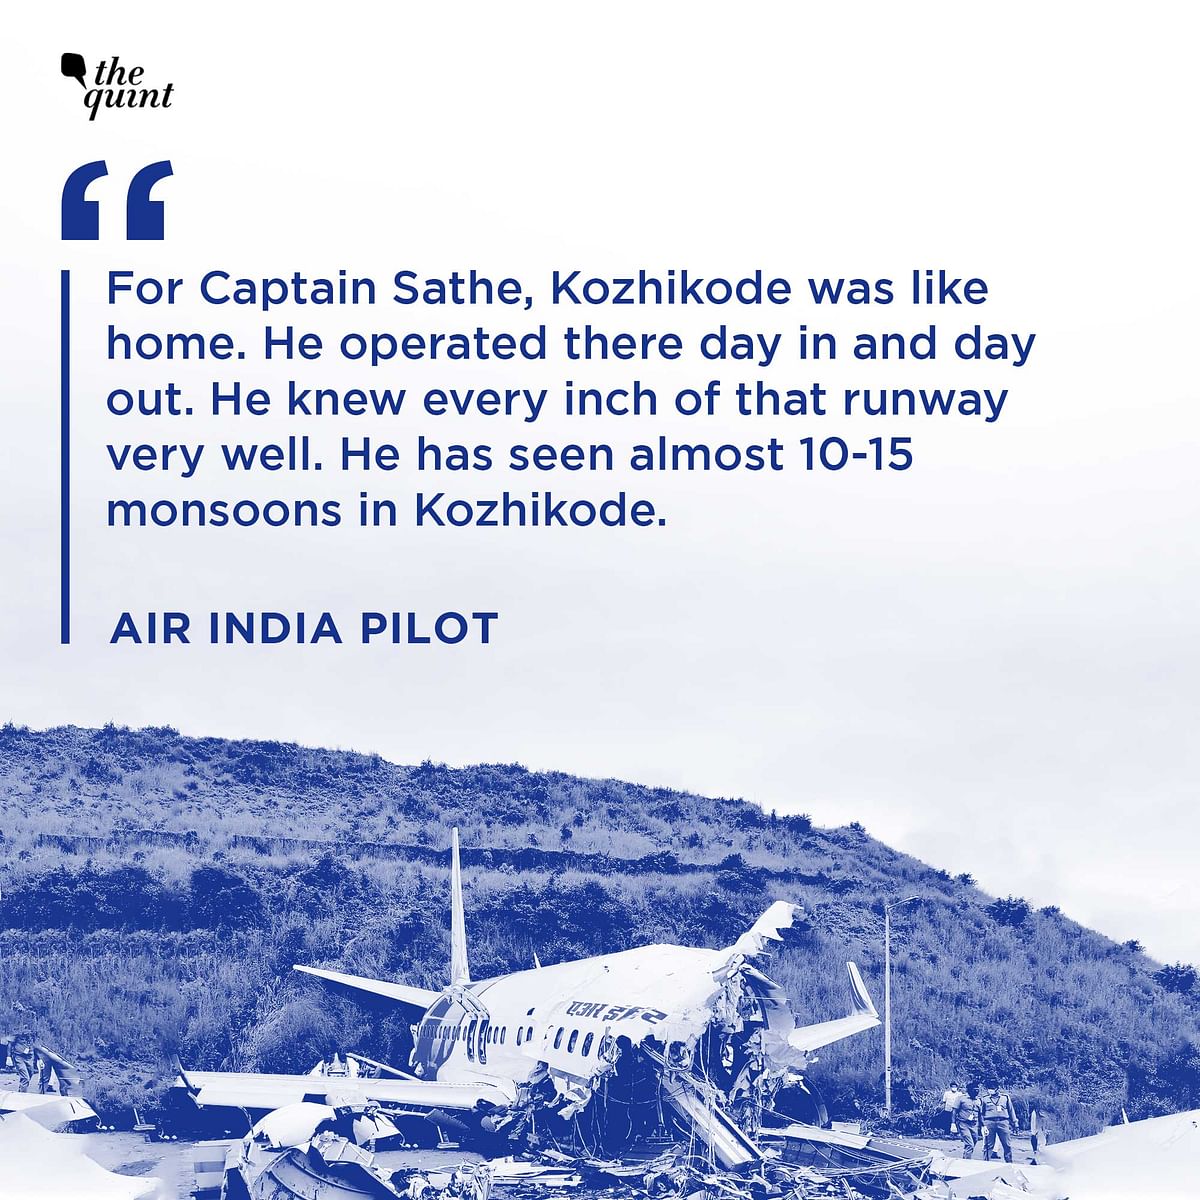 Air India pilot speaks to The Quint explaining what could be the possible reasons behind Kerala plane crash.